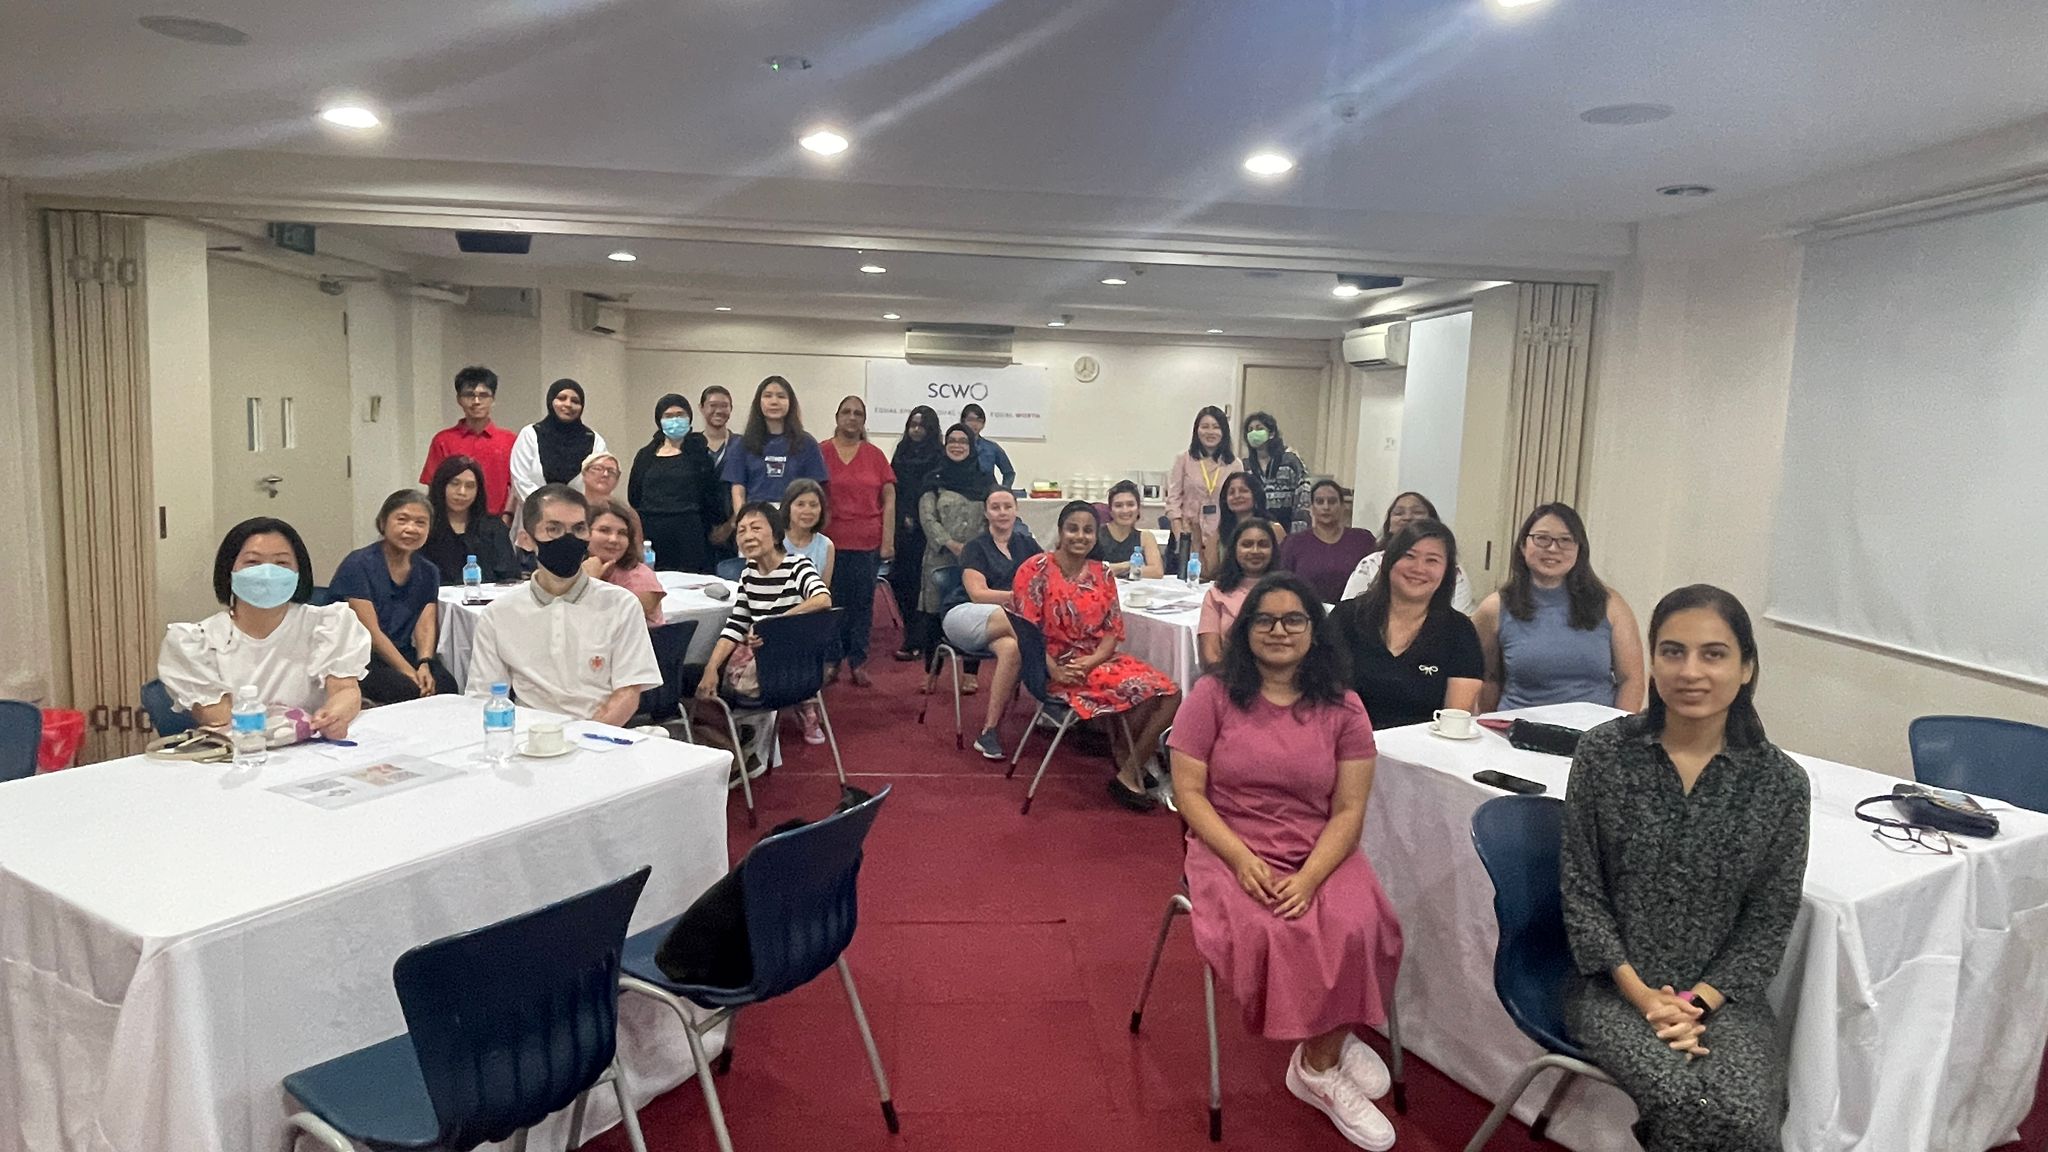 SCWO Volunteers’ Tea Talk: Making connections for a cause